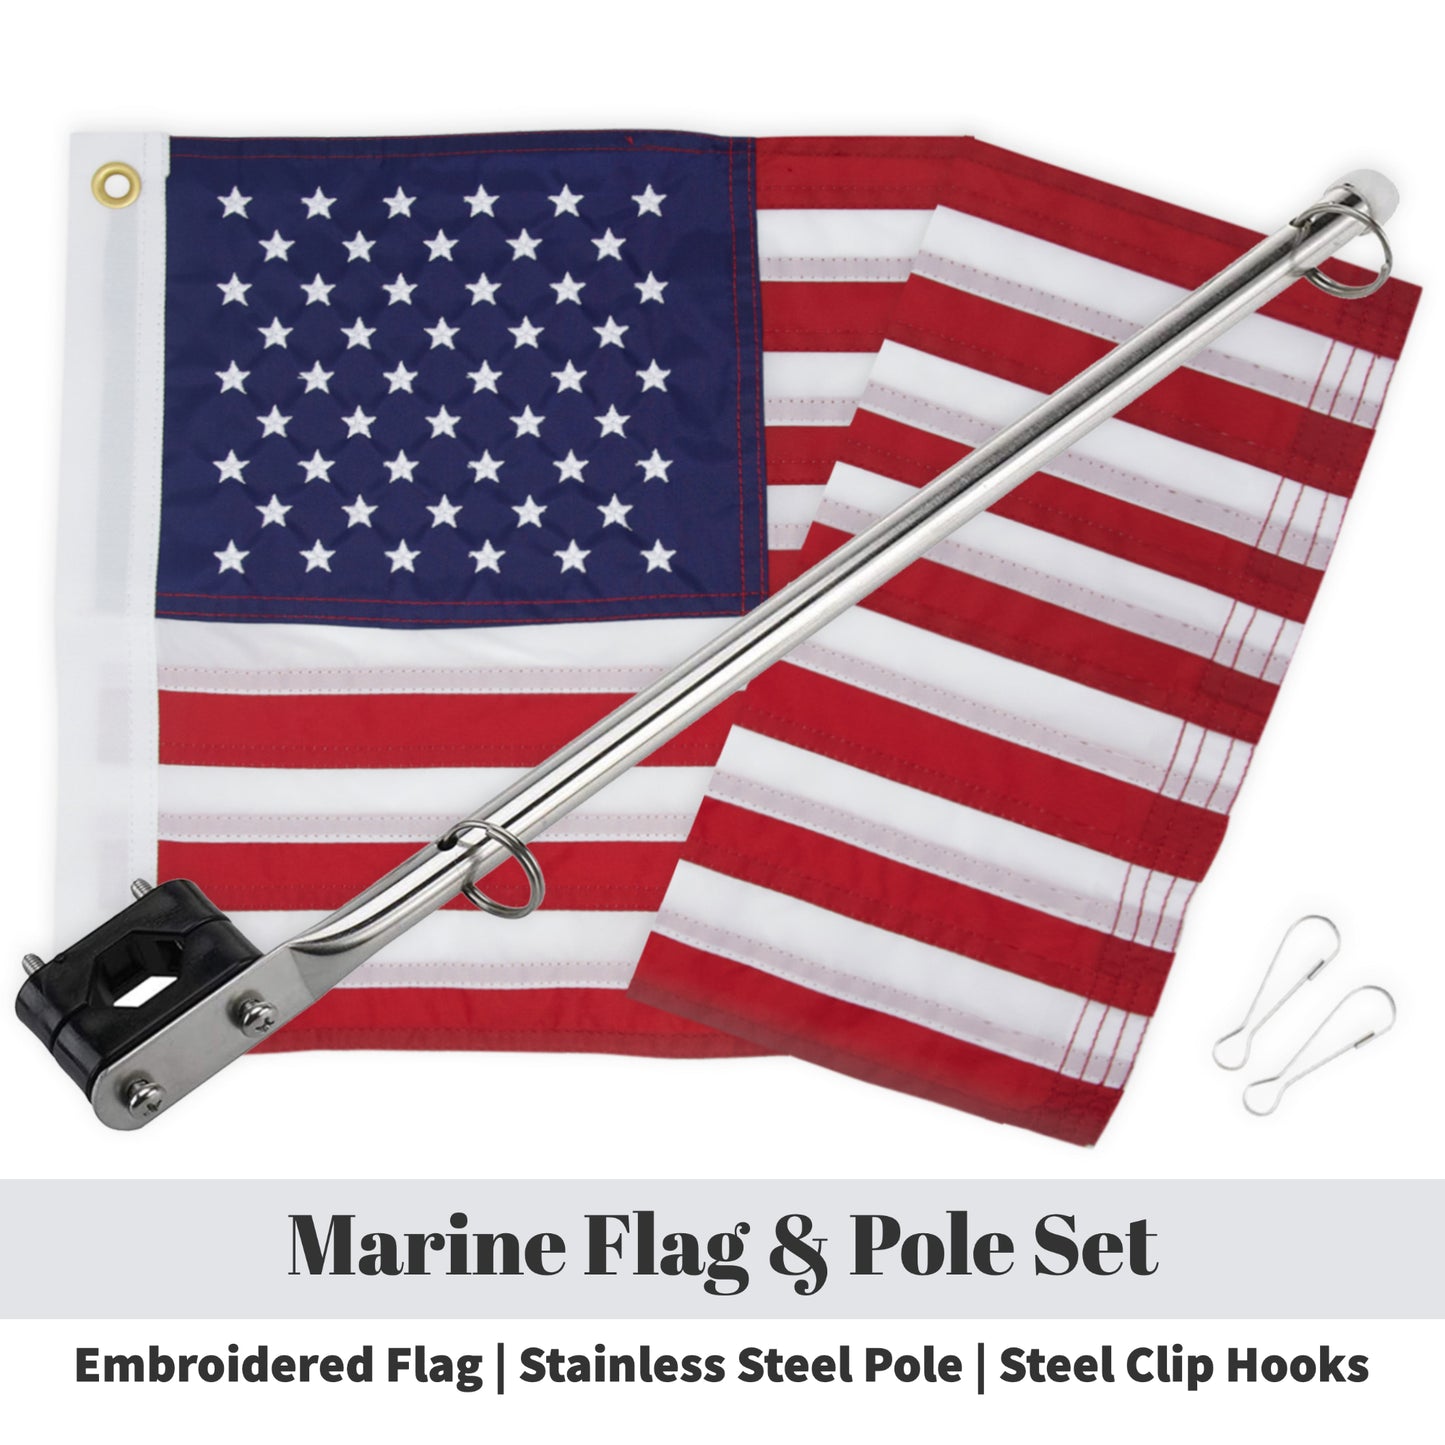 American USA Boat Flag With Pole Kit 12" x 18" Cabin Waterproof Embroidered Marine & Golf Cart Flags